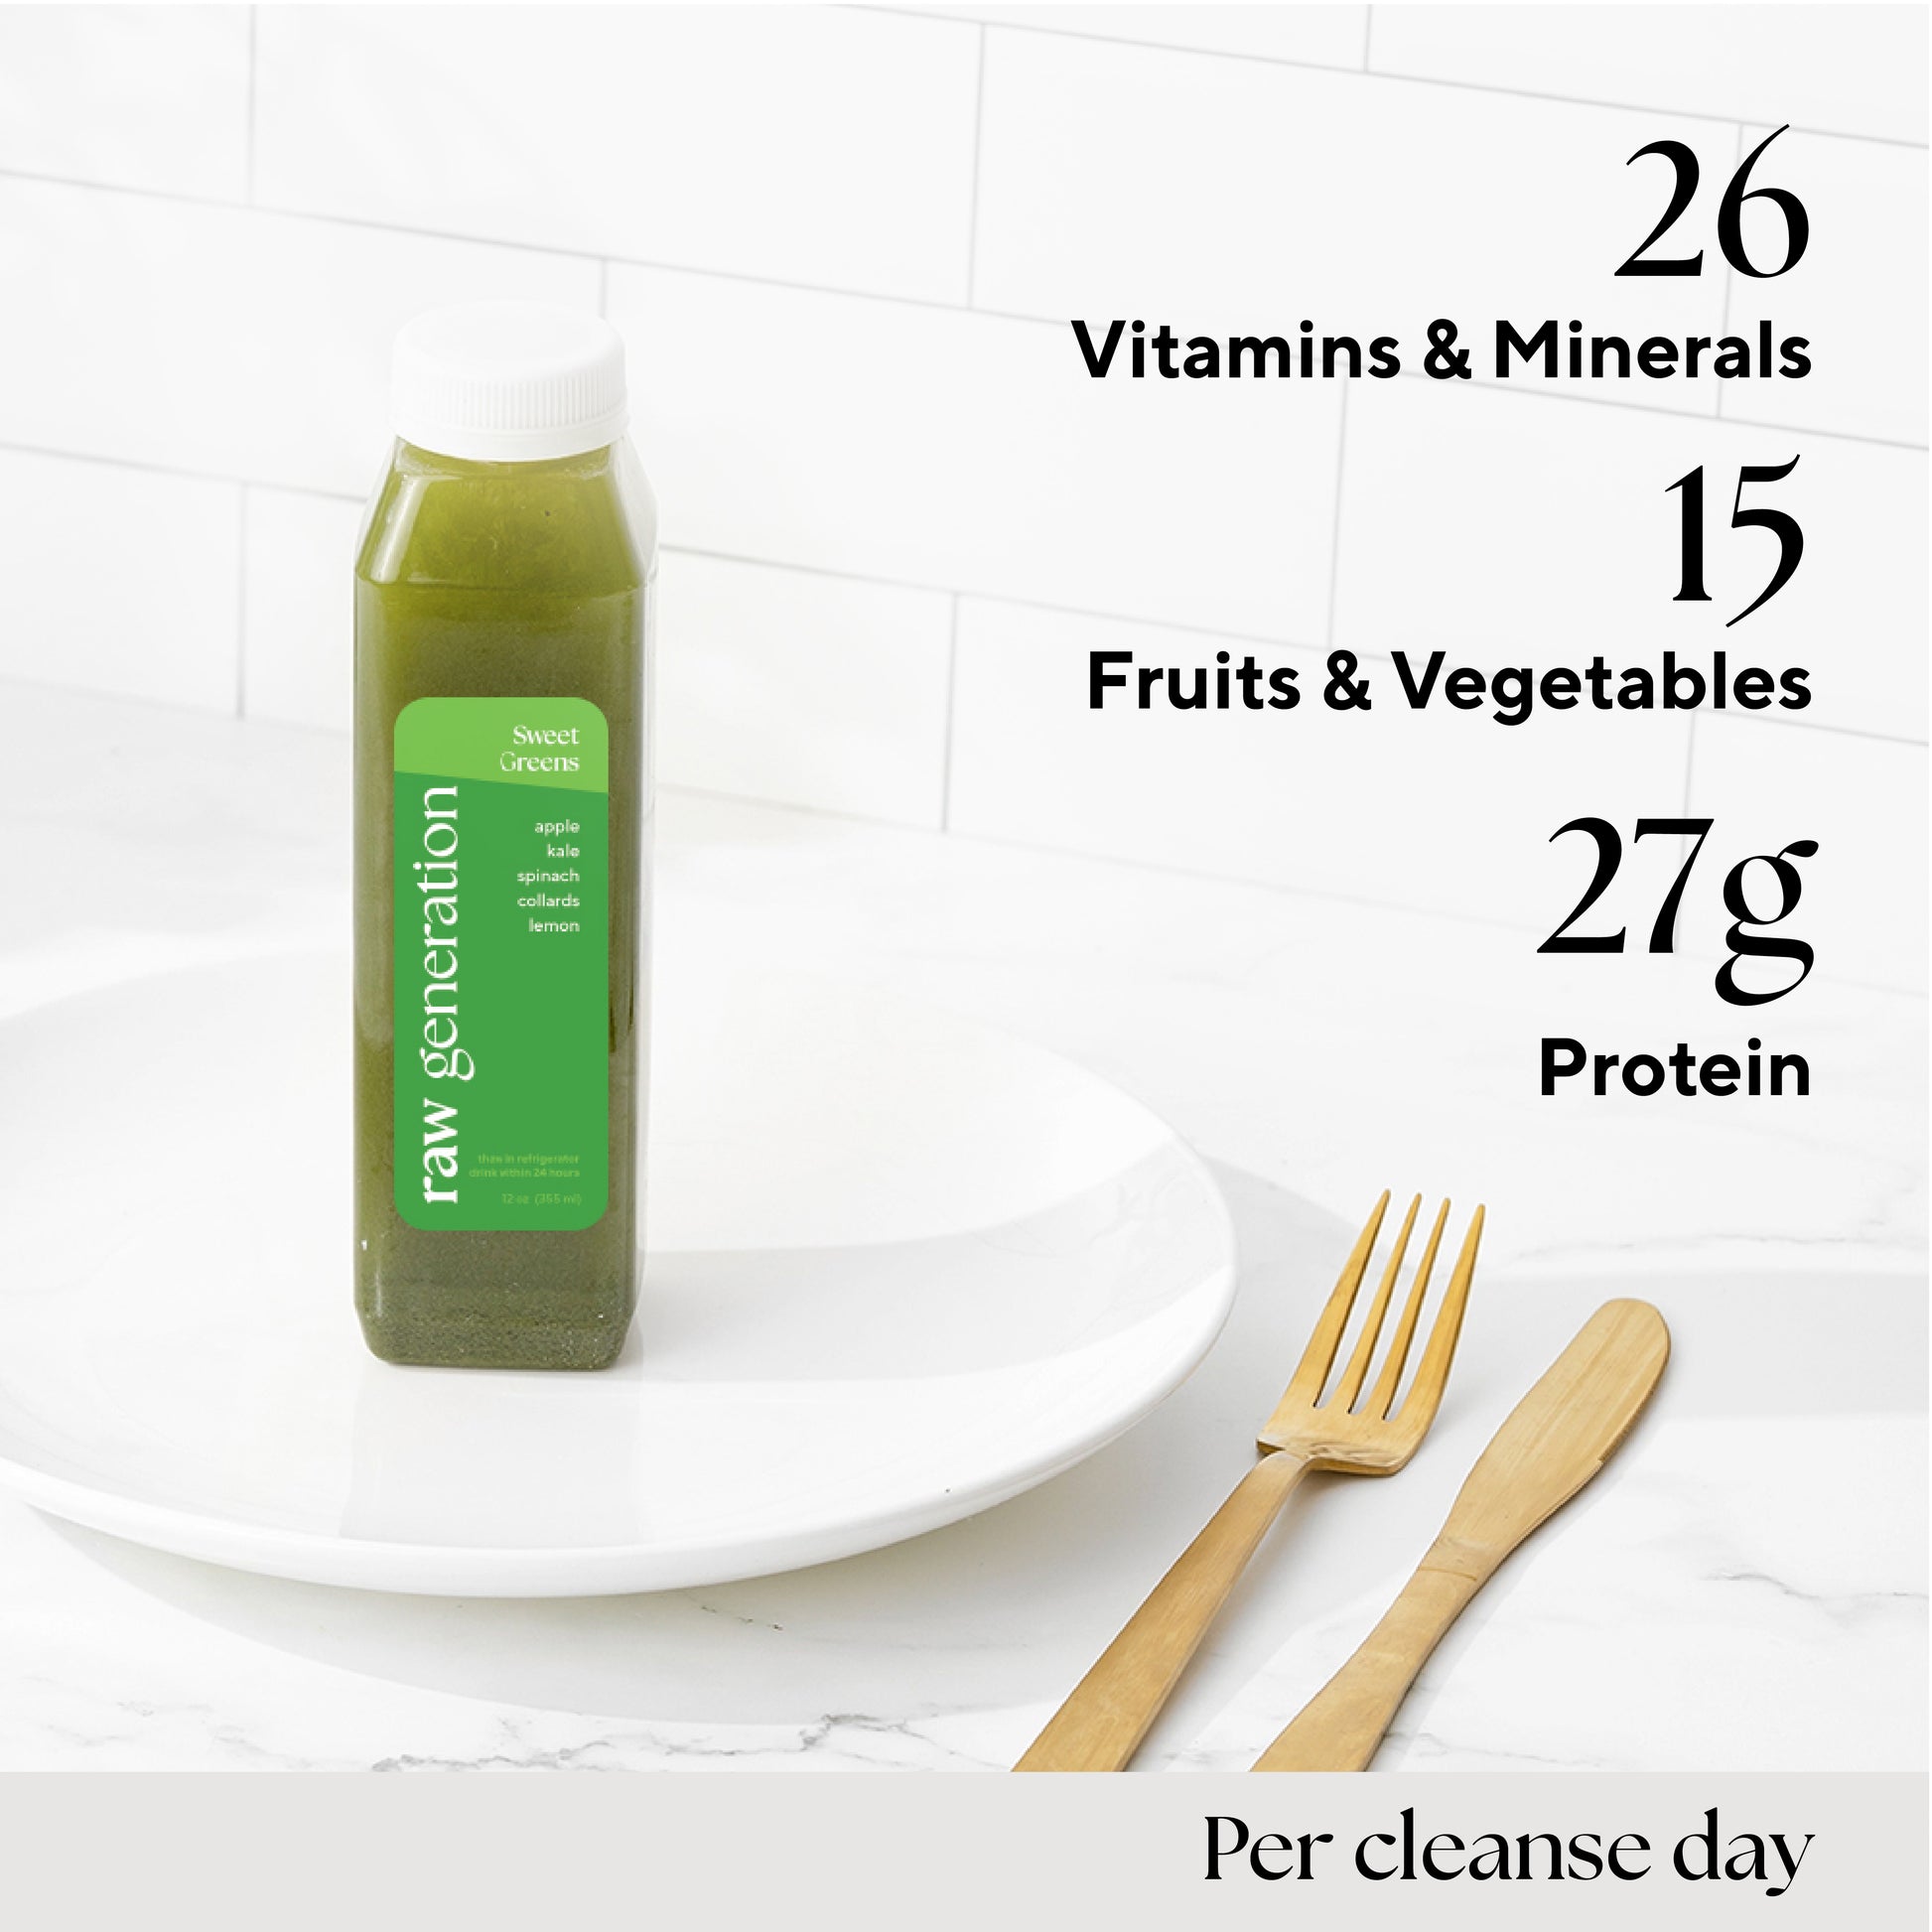 Infographic highlighting some of the nutrients per cleanse day, this includes: 26 Vitamins & Minerals, 15 Fruits & Vegetables, and 27 grams of Protein.